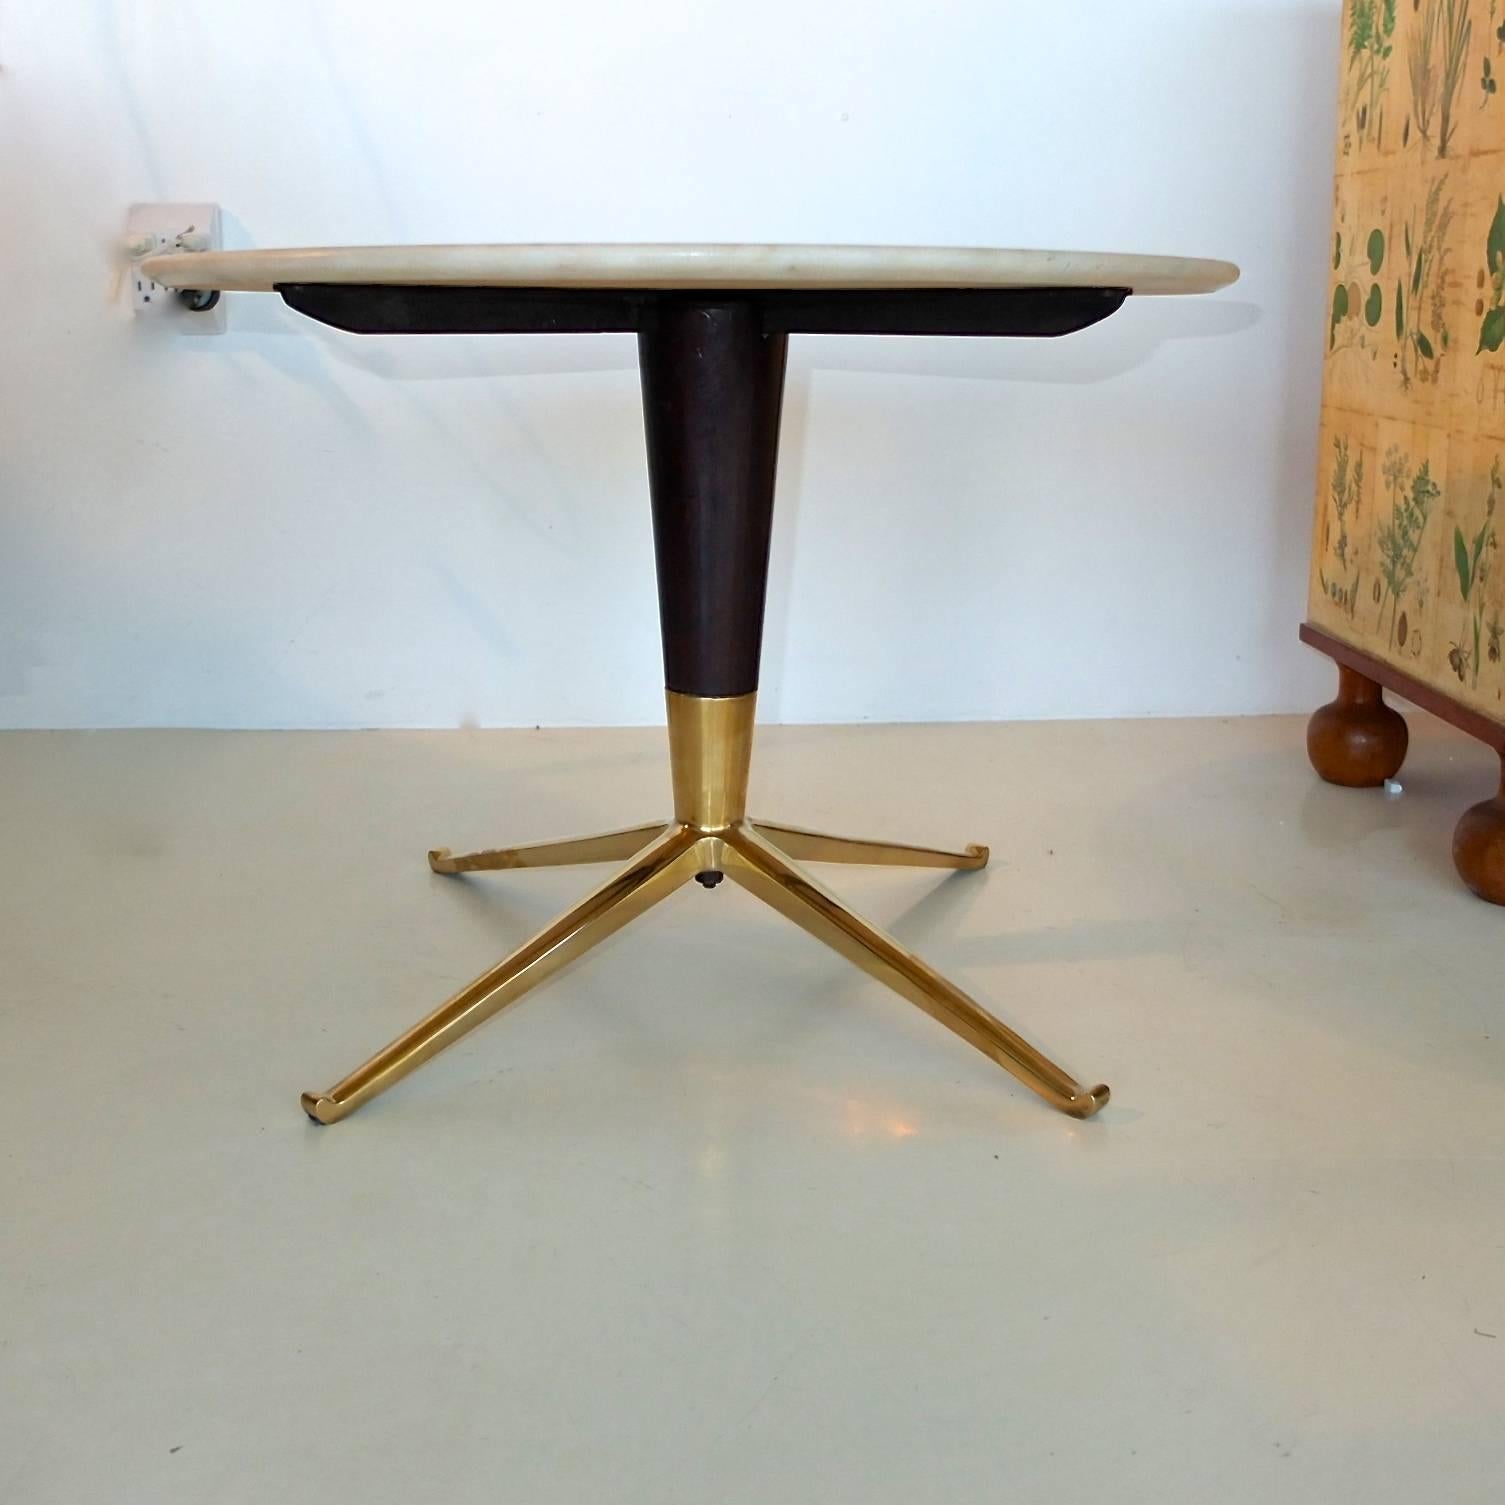 Cast 1950s Italian Cocktail Table Attributed to Melchiorre Bega